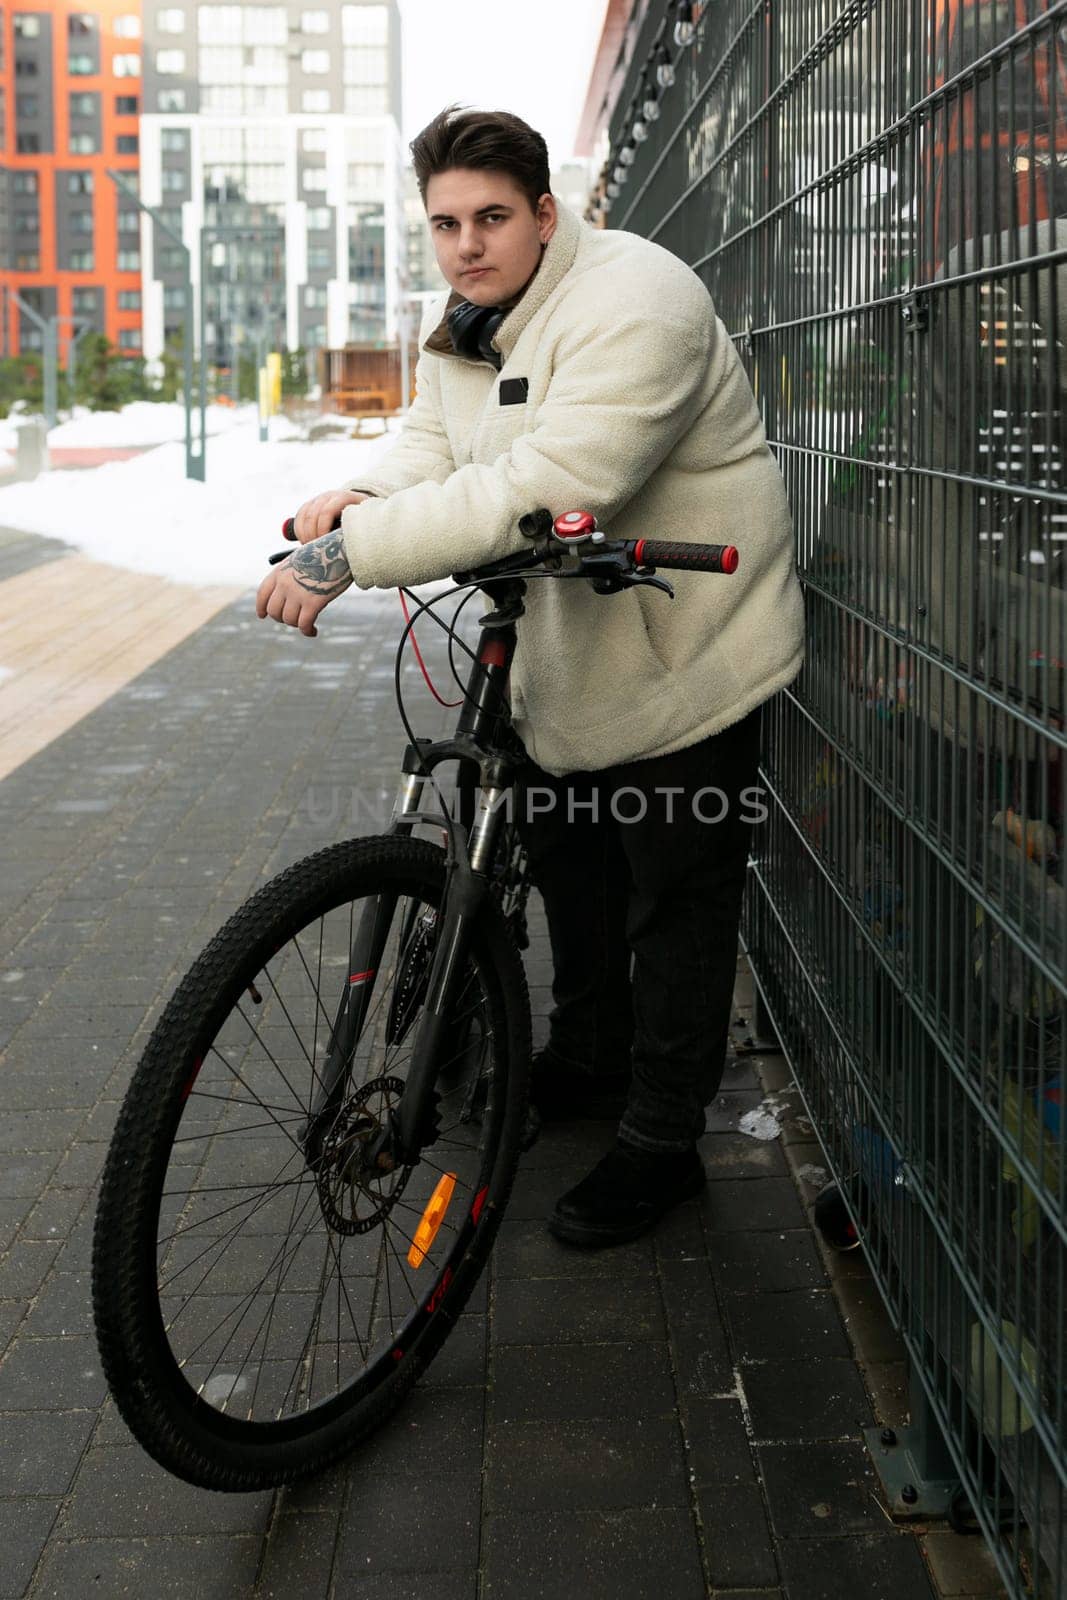 A young European man with a winter jacket walks around the city with a bicycle.